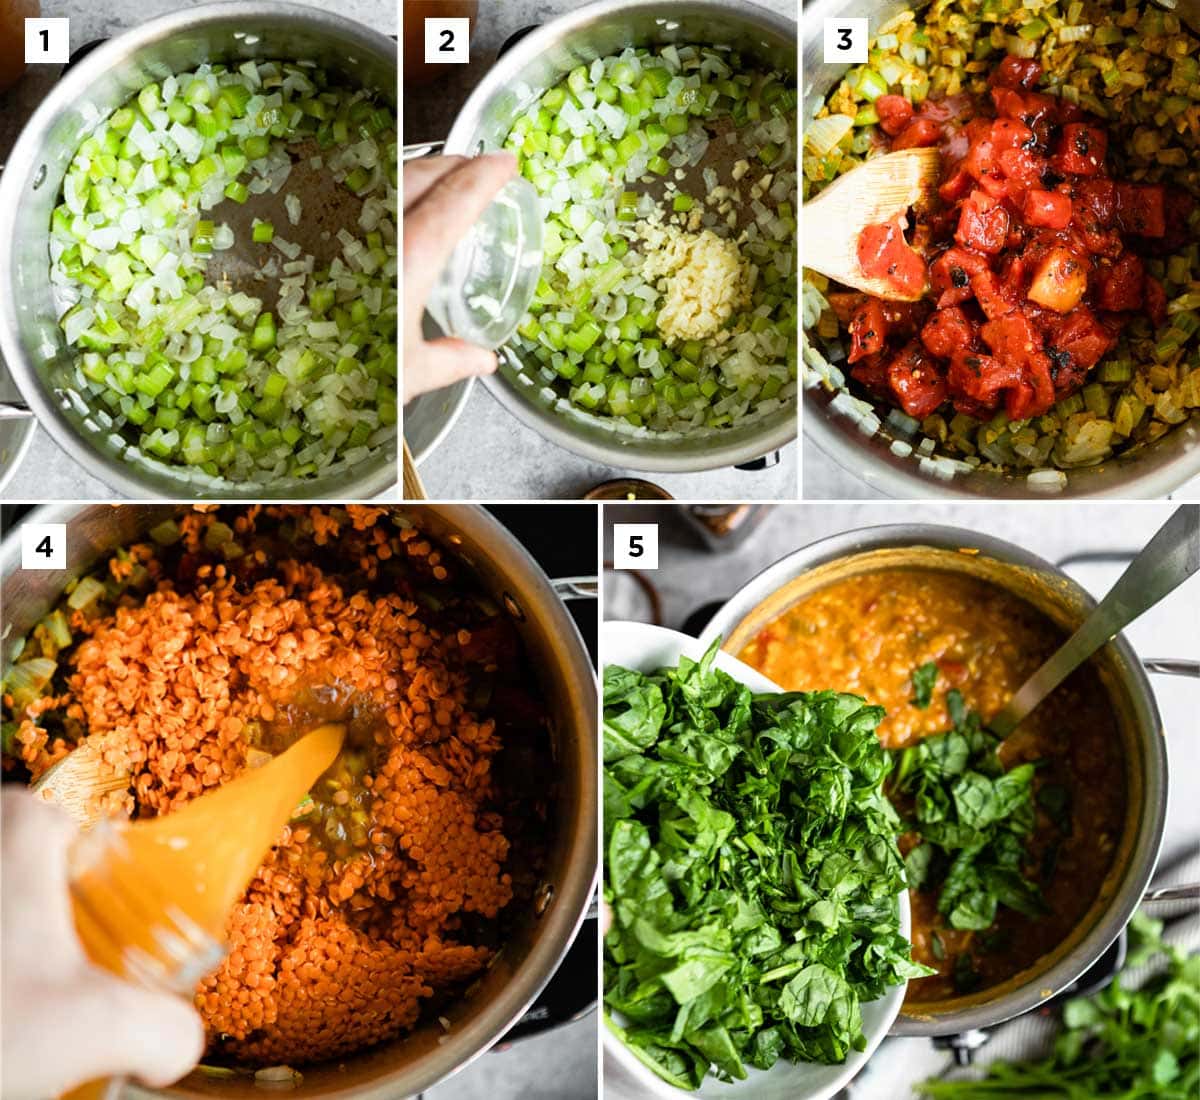 step by step instructions for making lentil soup: sauté, stir in remaining ingredients, add vegetable stock, then after the soup has simmered, add in spinach.